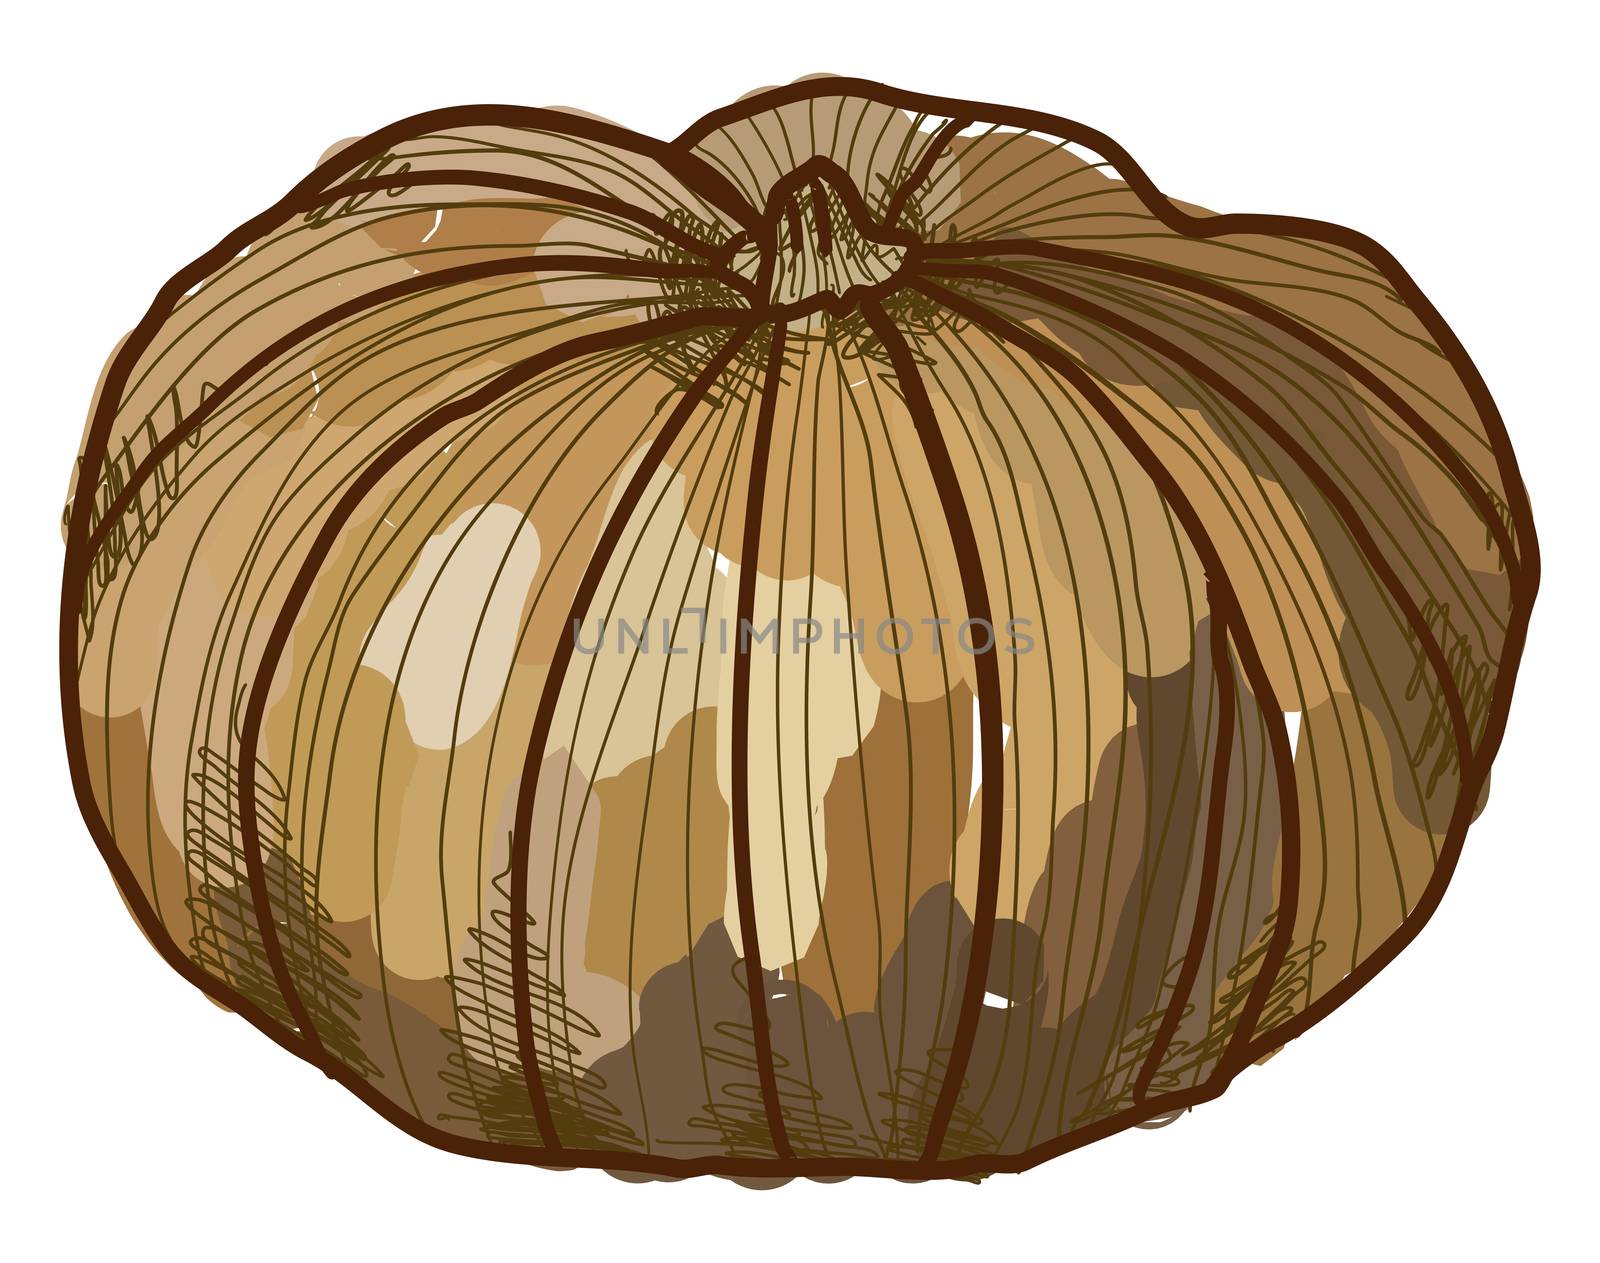 Cheese pumpkin, illustration, vector on white background by Morphart